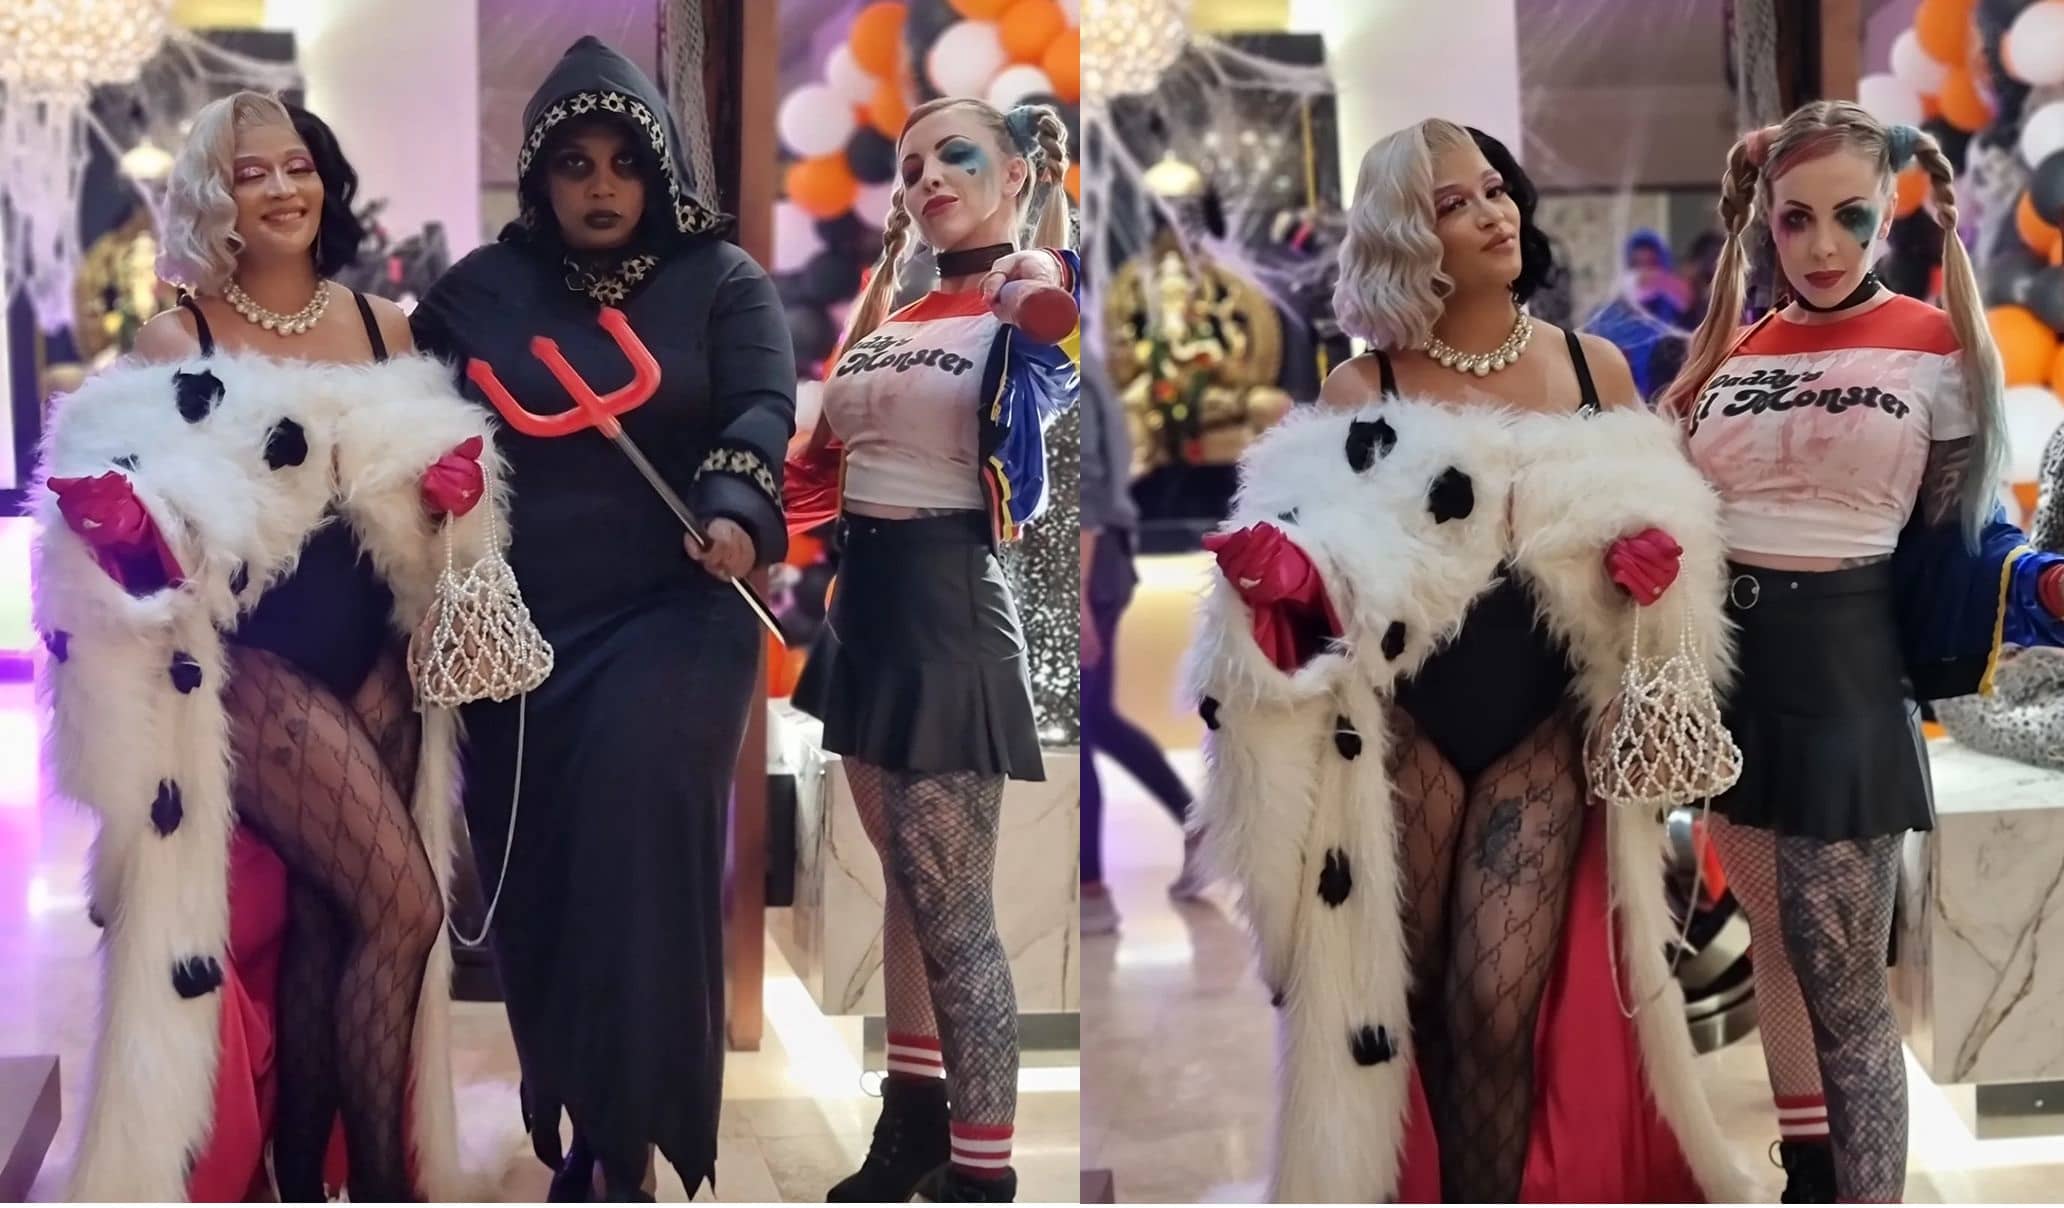 In Pictures: The Real Housewives of Durban cast costume party outfits shock Mzansi